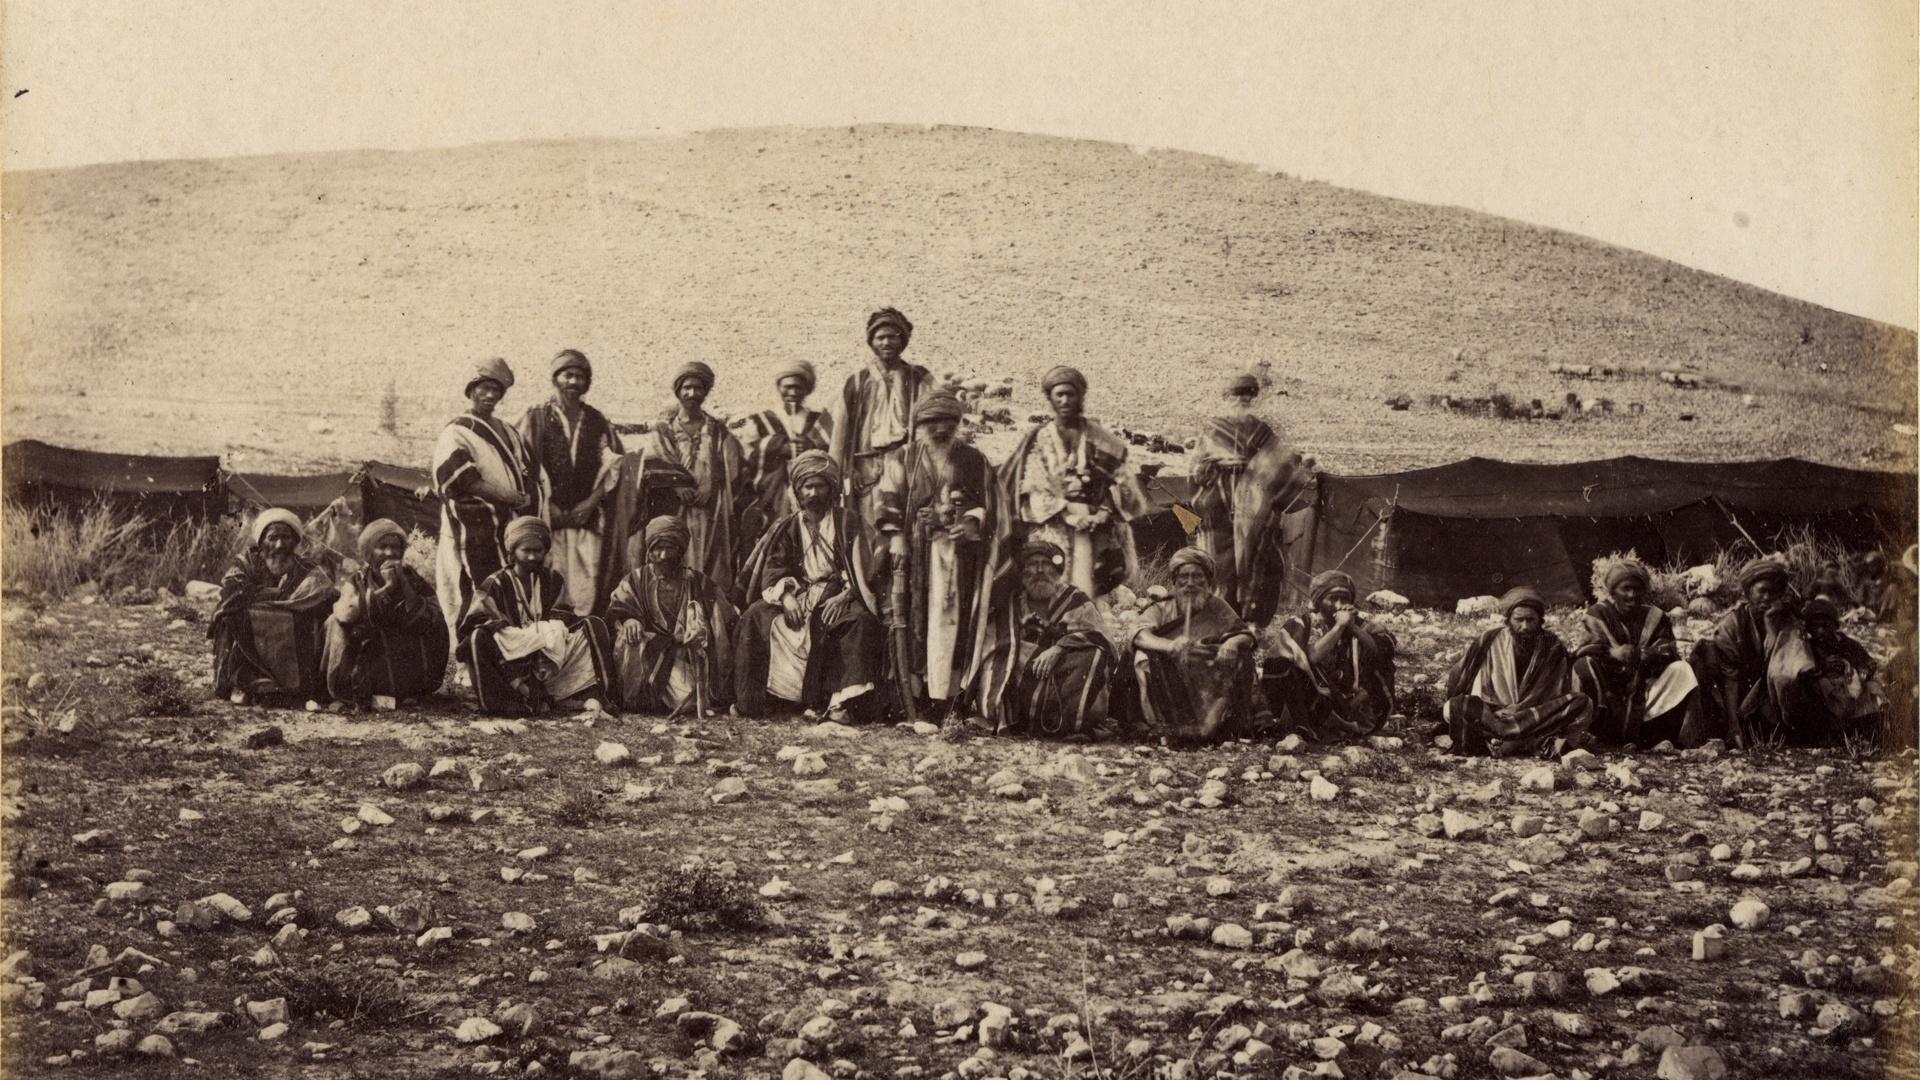 Bedouin and new Jewish settlers often clashed over their different understandings of land ownership.